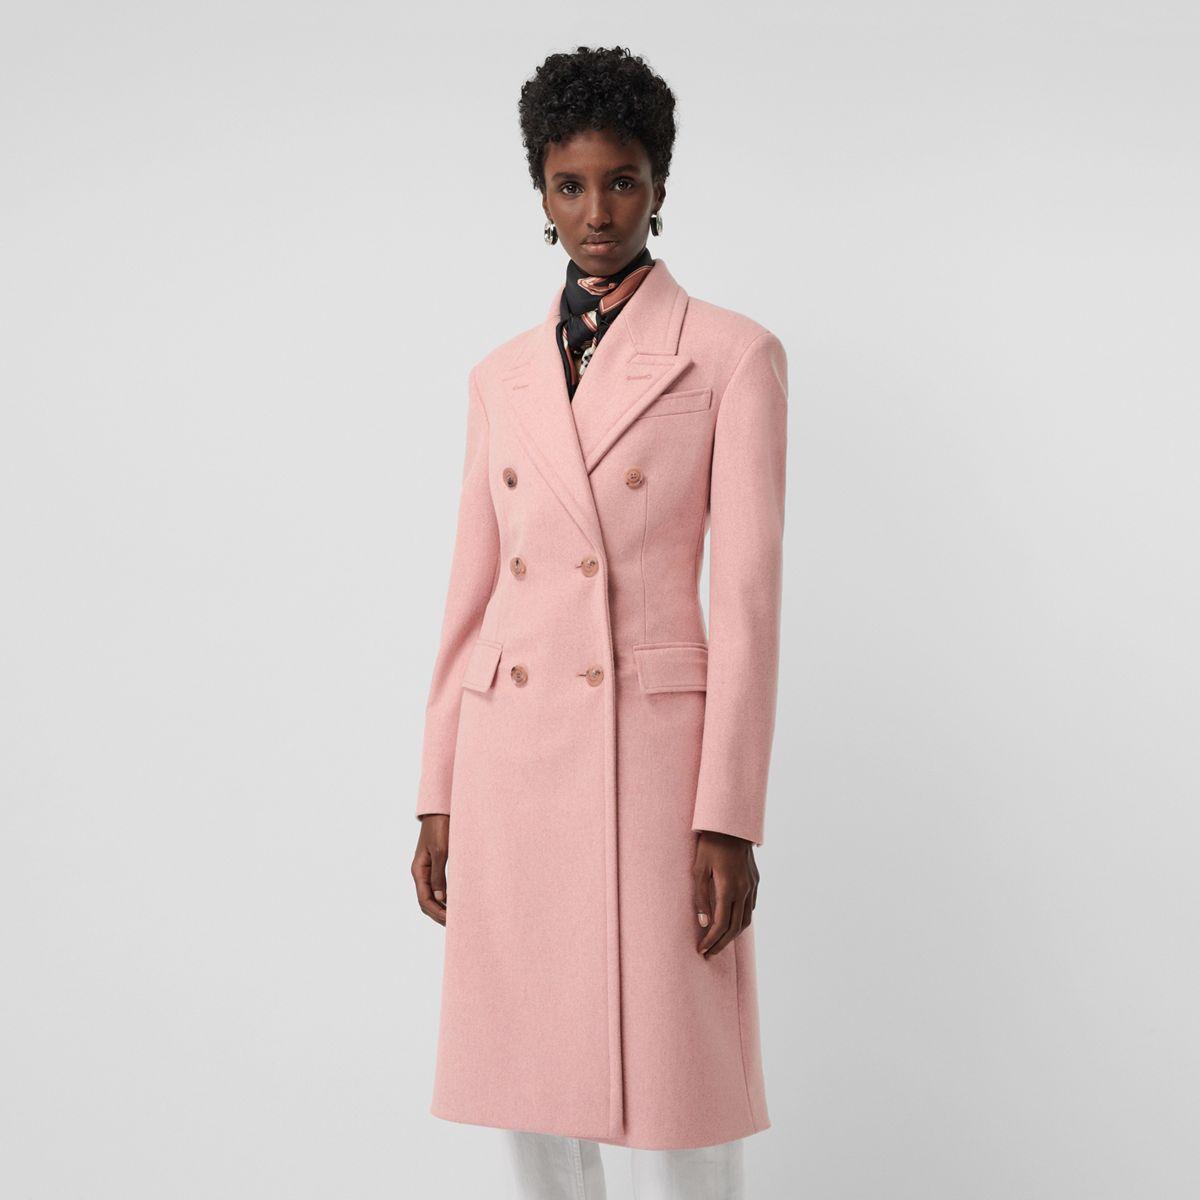 Burberry Double-breasted Virgin Wool Coat in Pink - Lyst